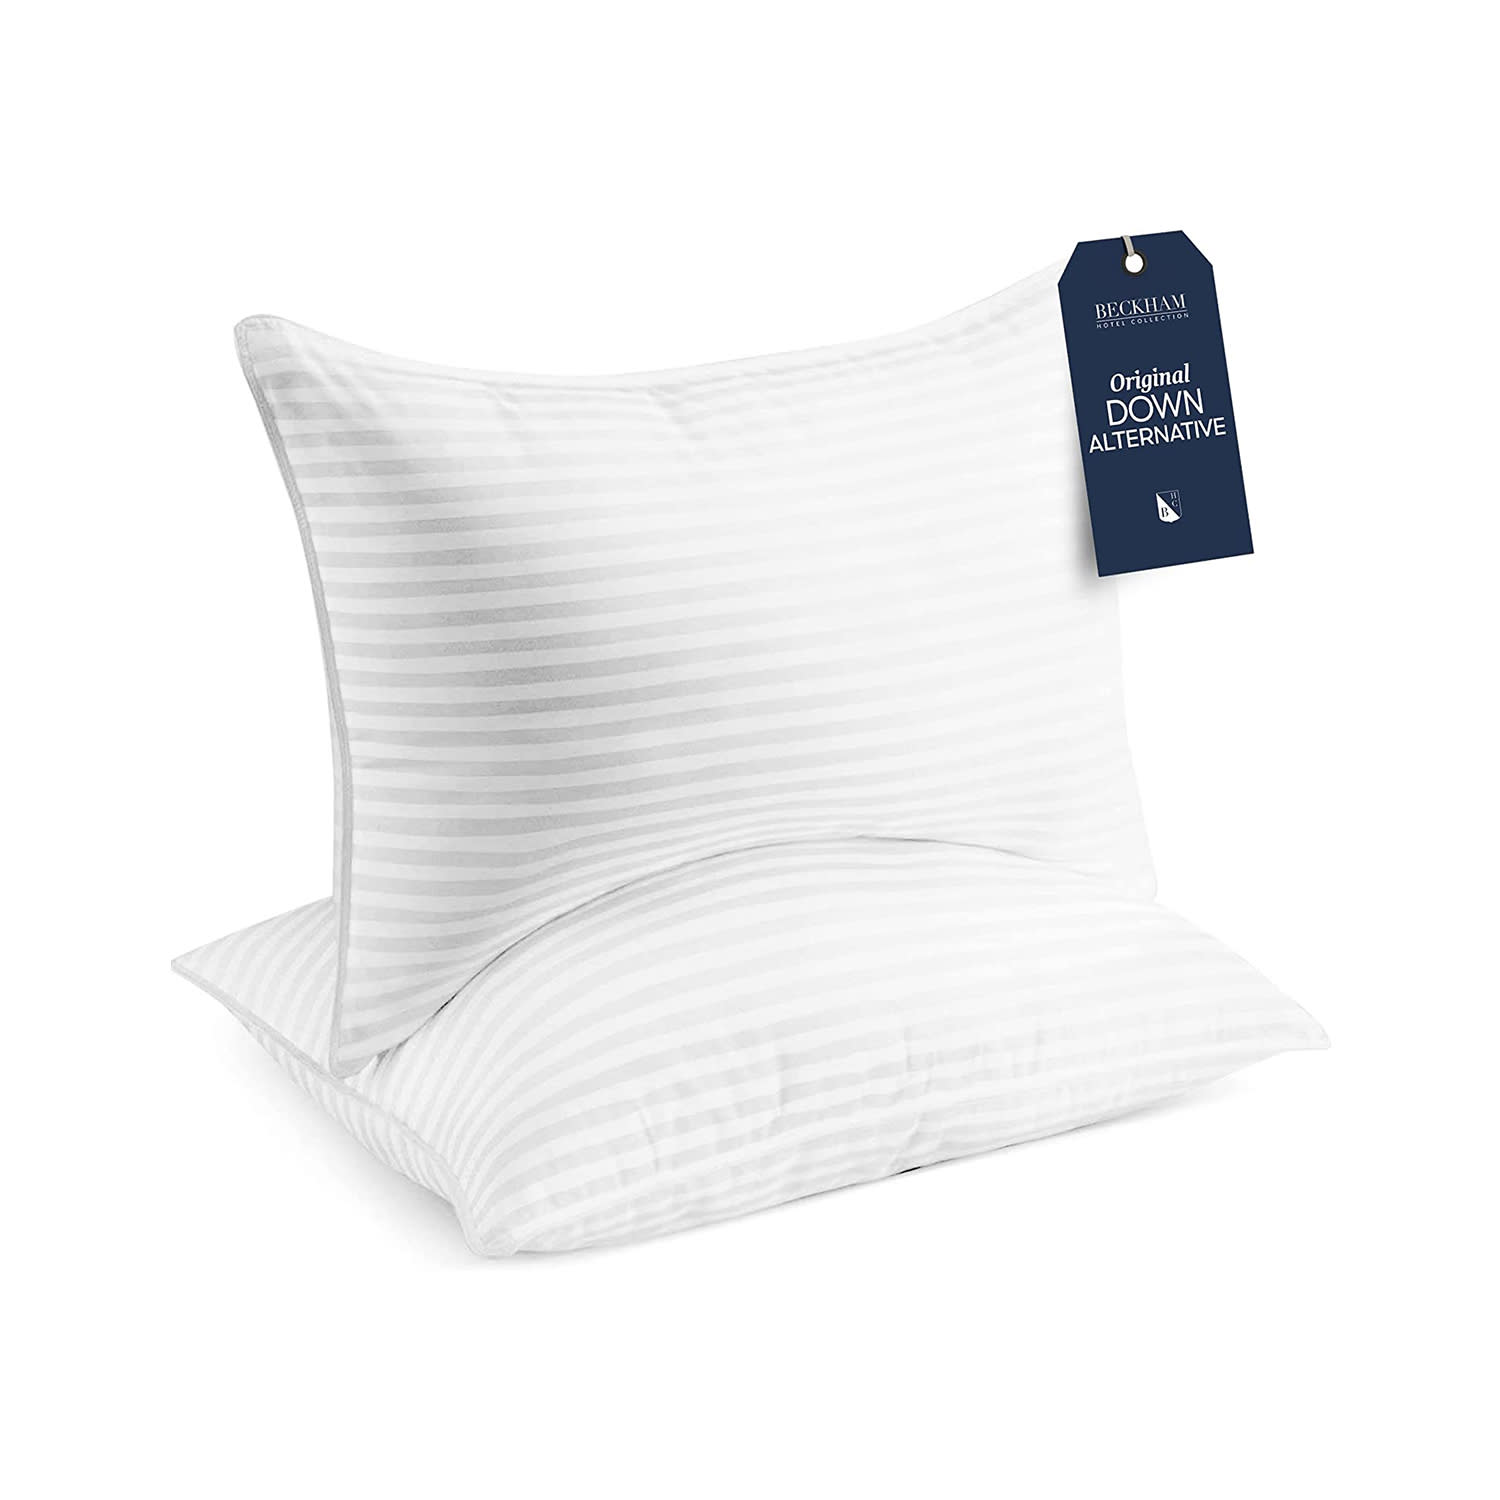 https://cdn.apartmenttherapy.info/image/upload/v1696944934/at/shopping/beckham-hotel-collection-bed-pillows-standard.jpg